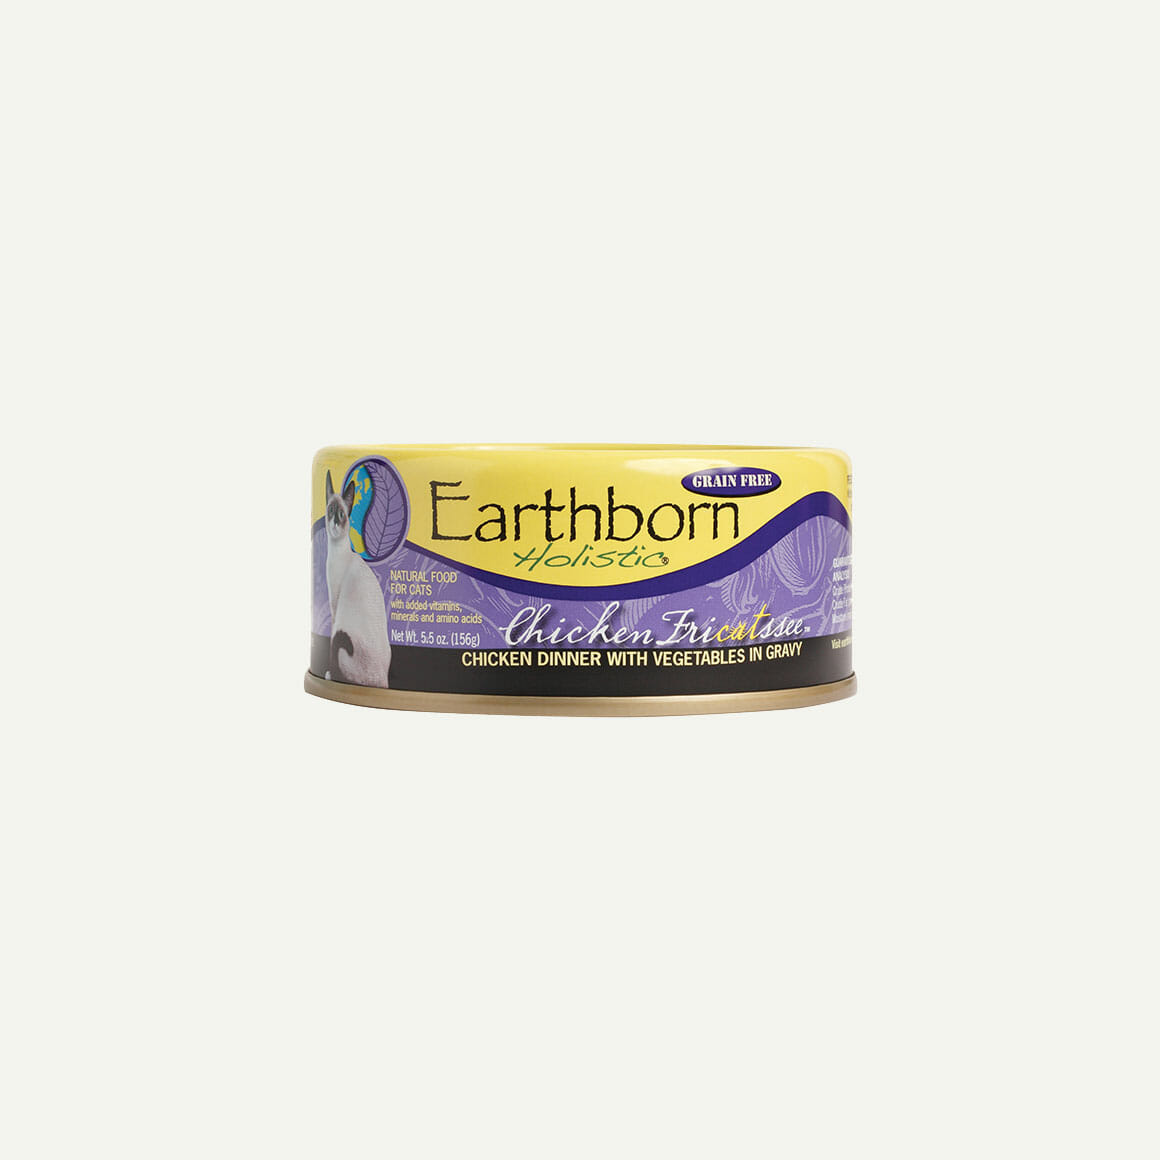 Earthborn Canned Cat Food Chicken Fricatssee 5.5oz